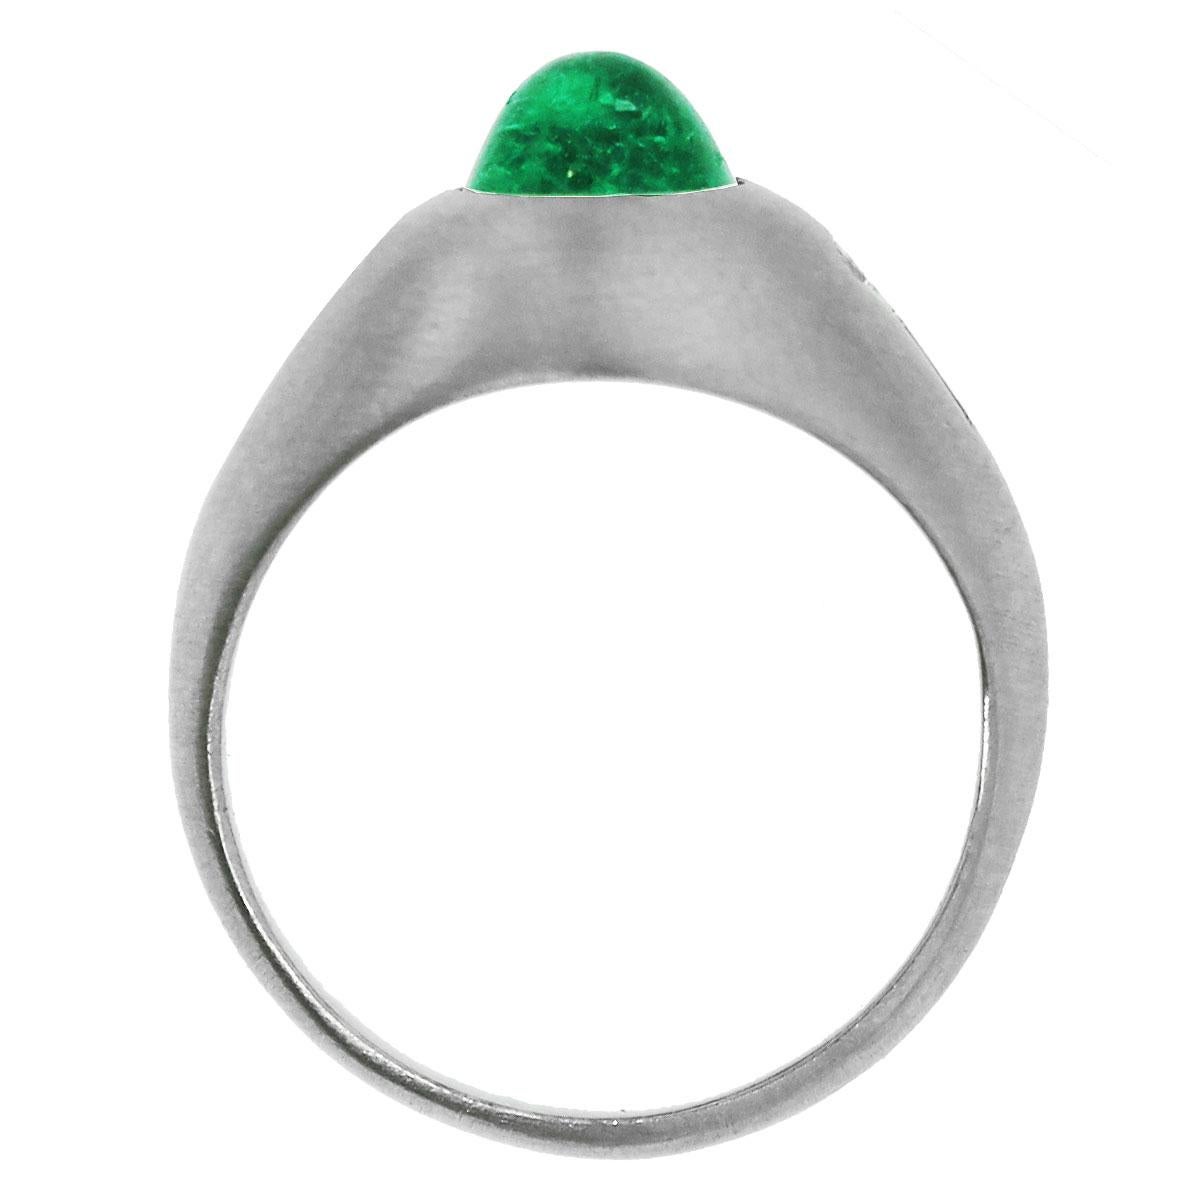 Material 	Platinum
Gemstone Details: Approximately 1.50ct emerald cabochon gemstone
Diamond Details: Approximately 0.30ctw baguette and marquise accent diamonds. Accent diamonds are H/I in color and SI1-SI2 in clarity.
Ring Size: 6 (can be